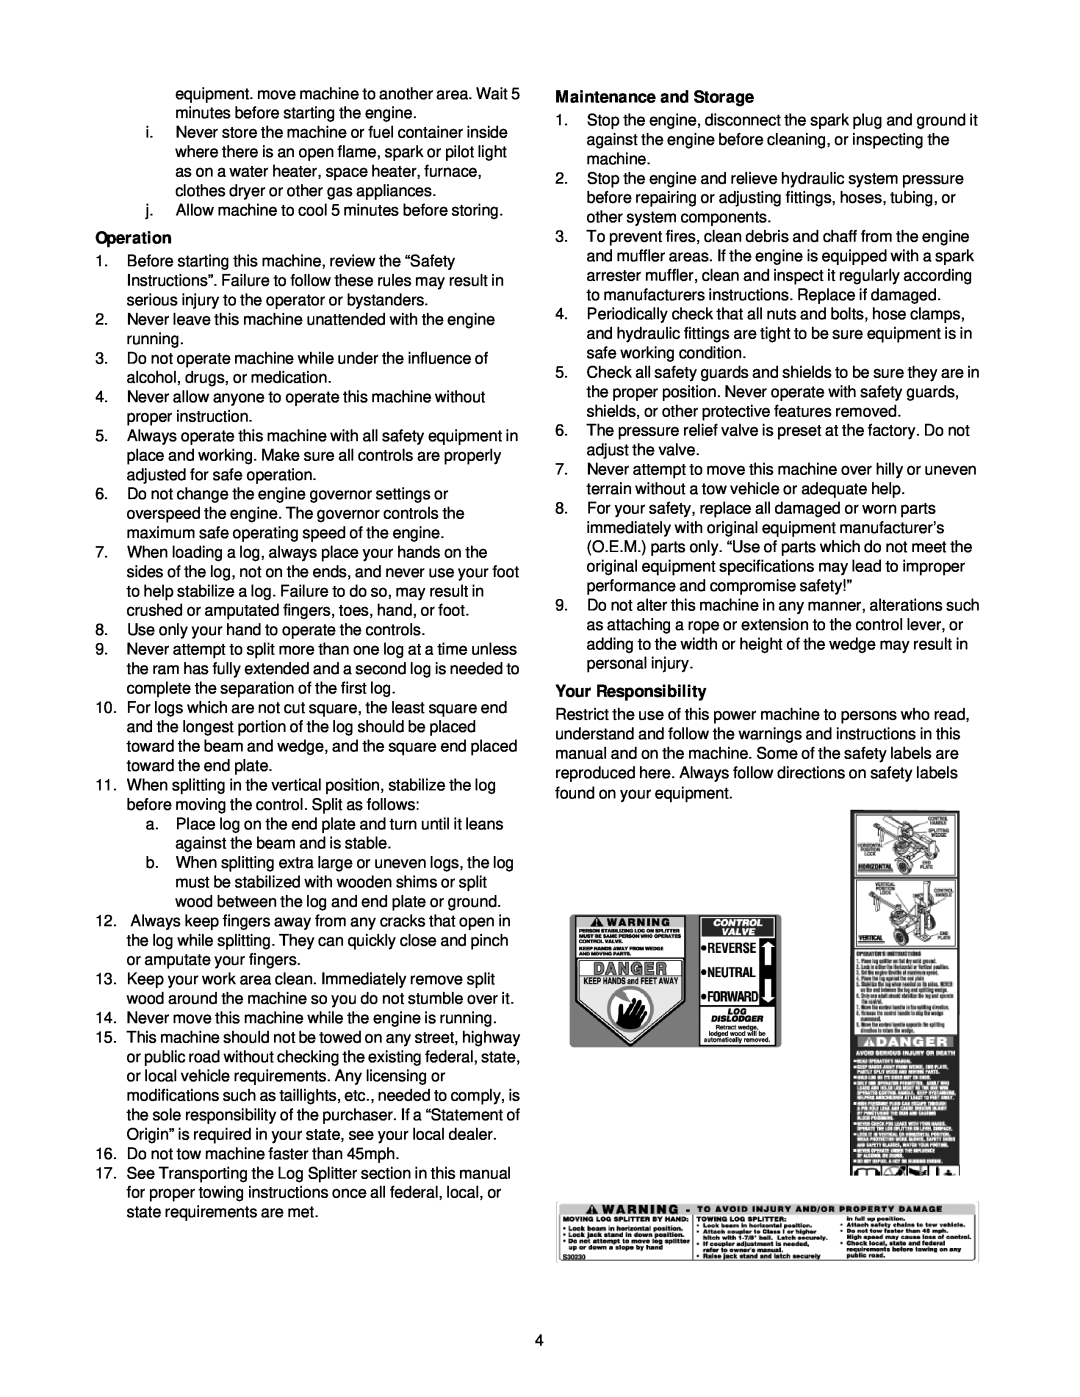 Troy-Bilt LS338 manual Operation, Maintenance and Storage, Your Responsibility 